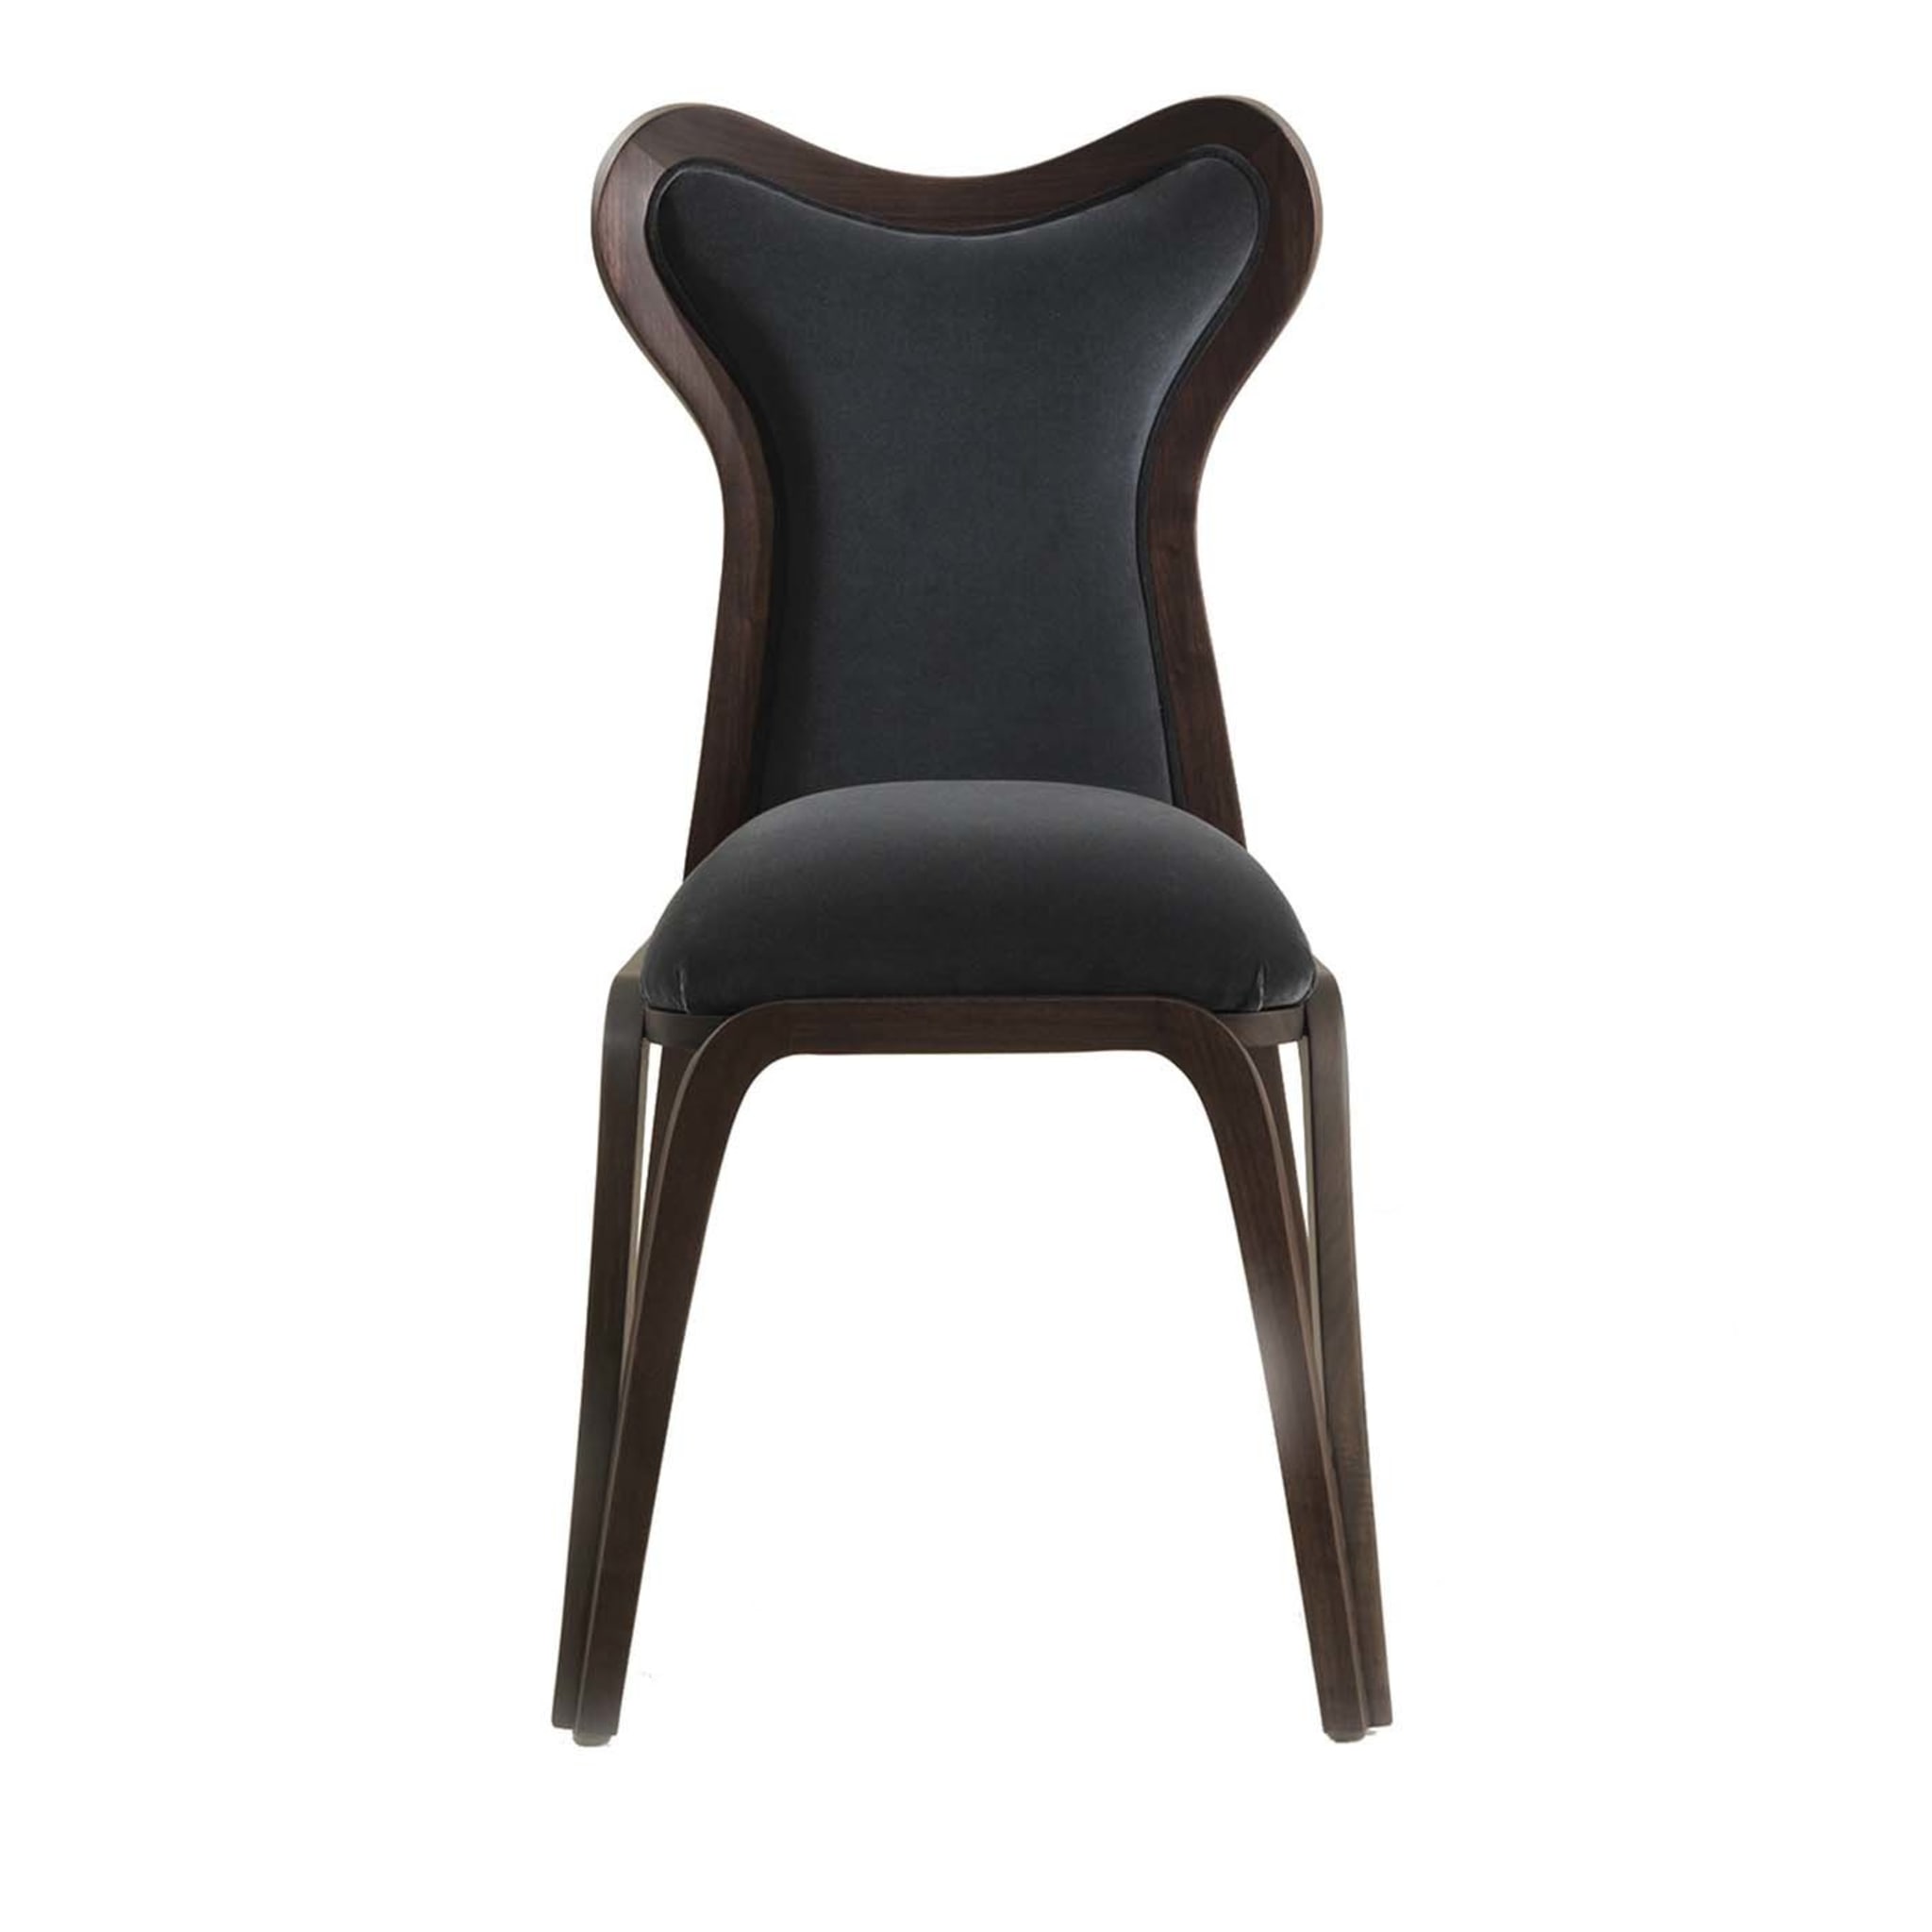 Daina-up Chair with Full Back by Nigel Coates - Main view